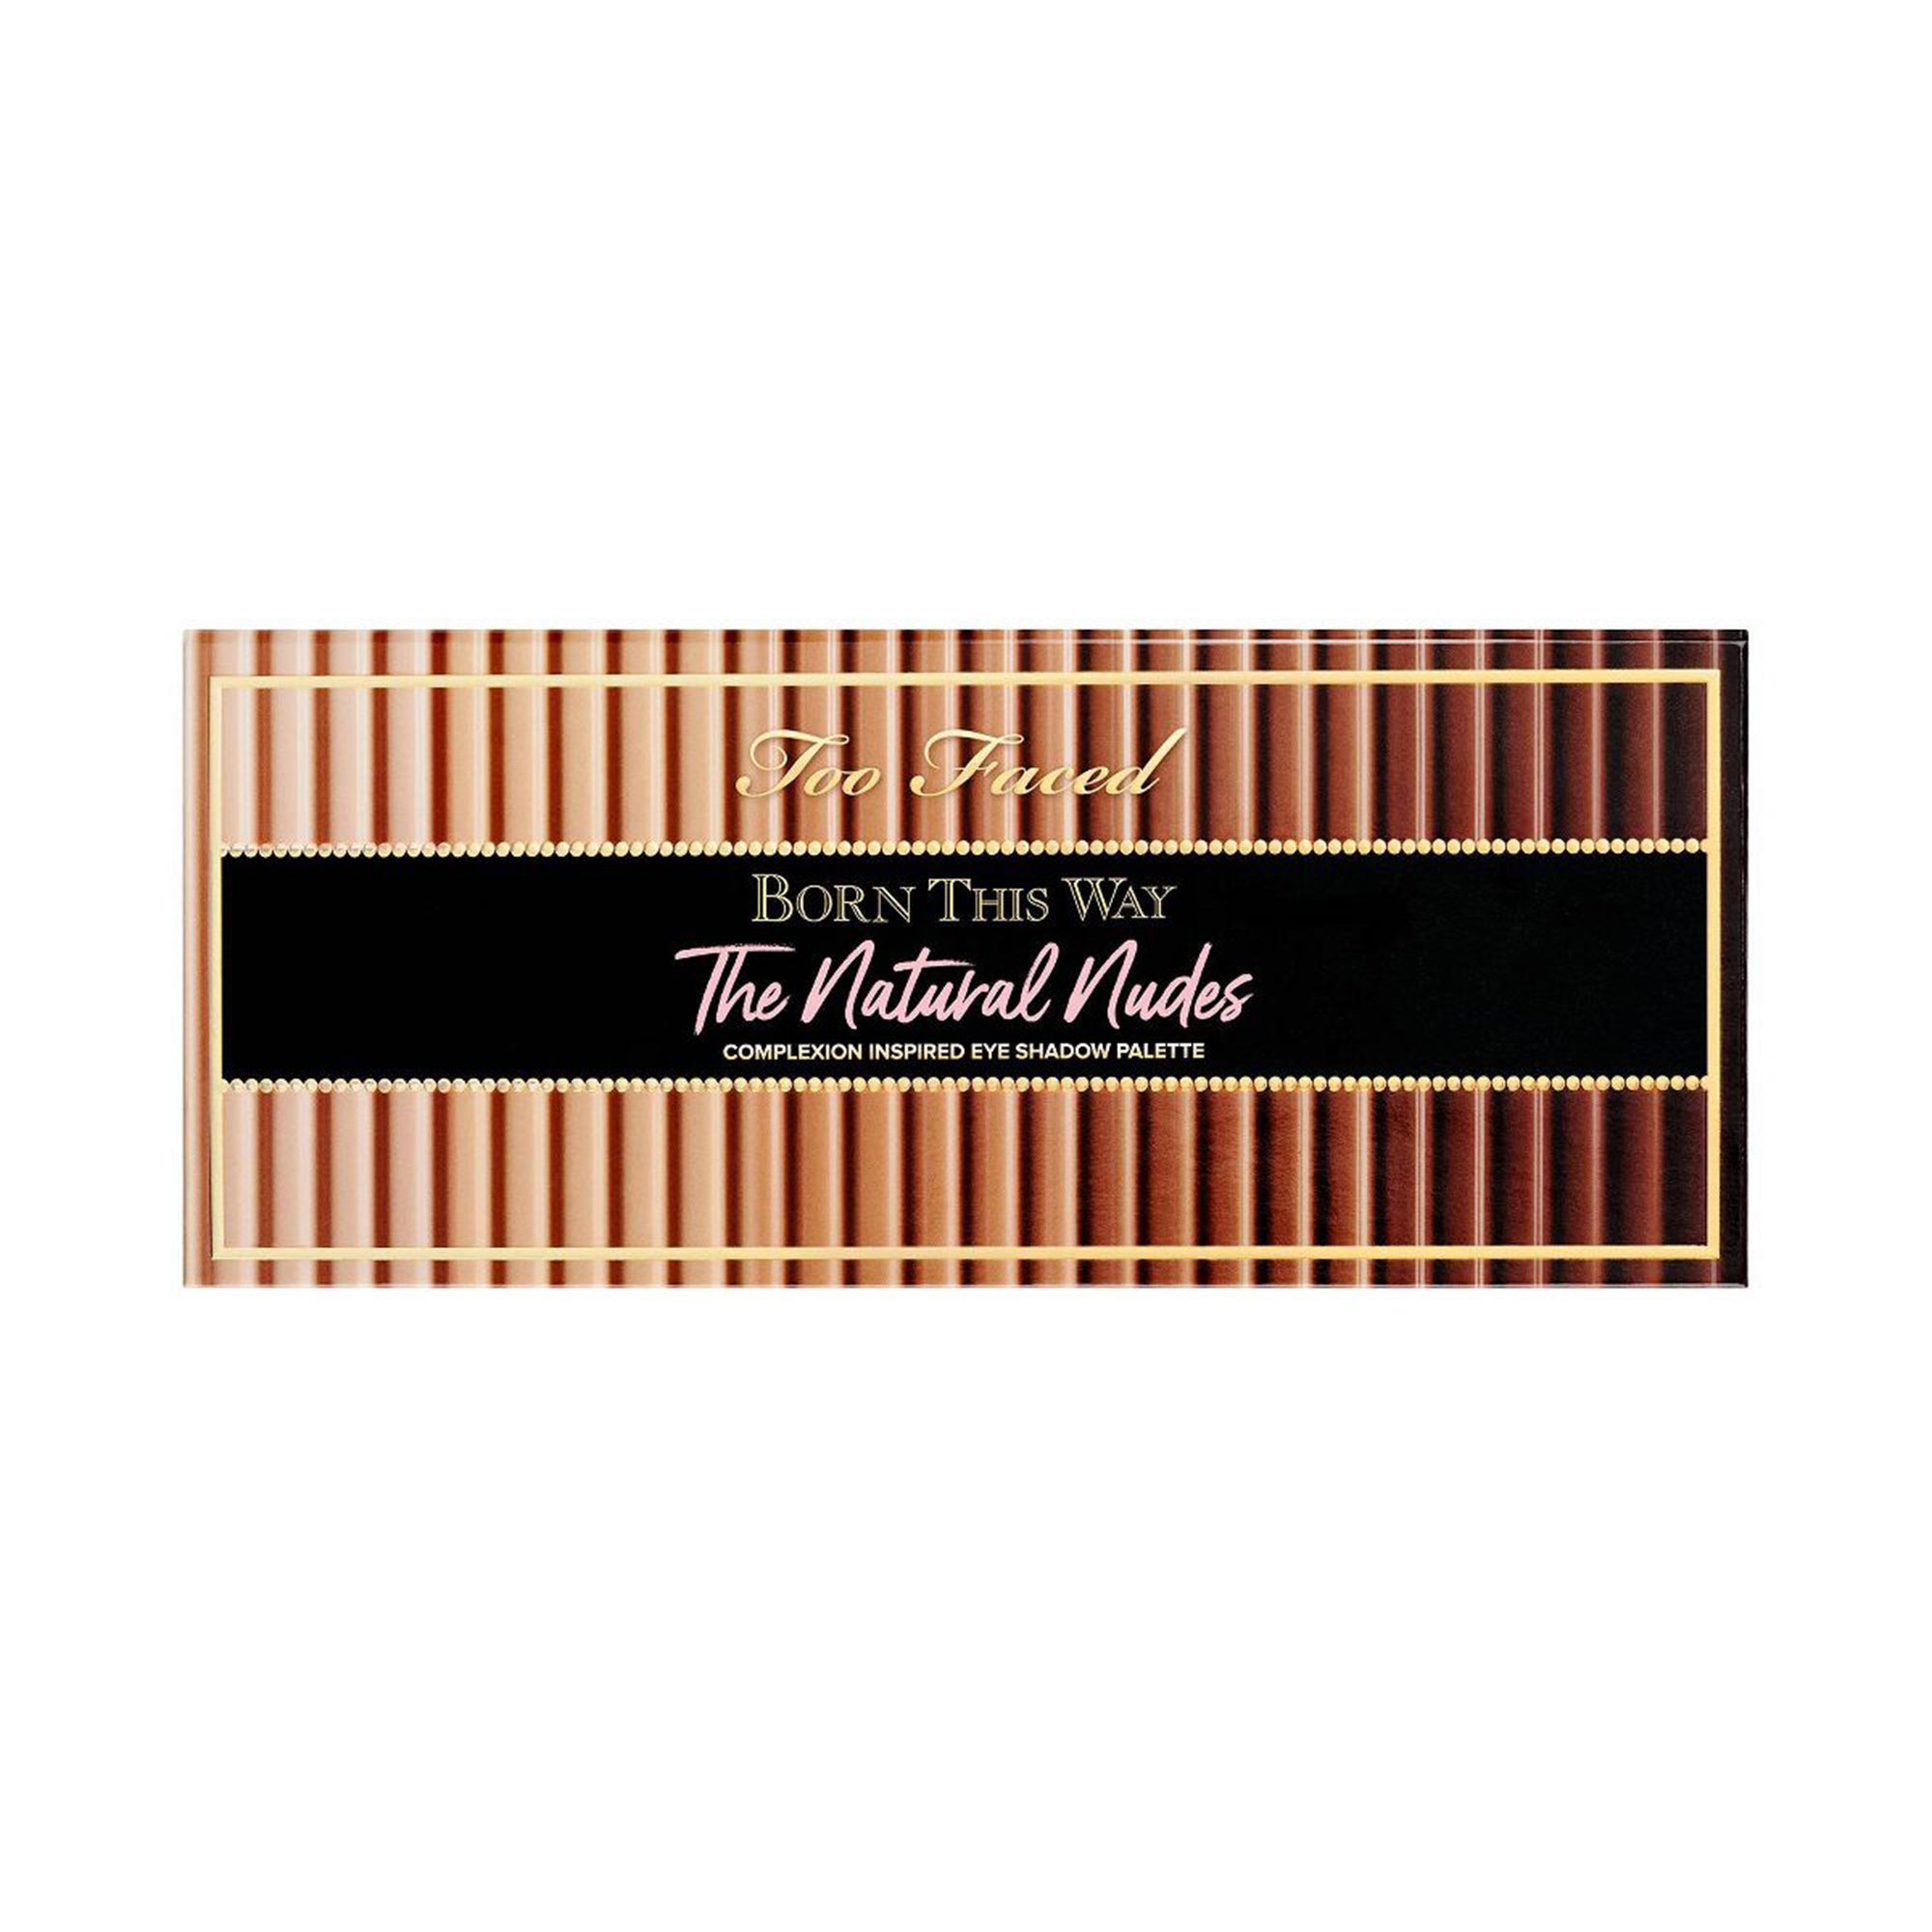 Too Faced Born This Way The Natural Nudes Eye Shadow Palette 0.48oz